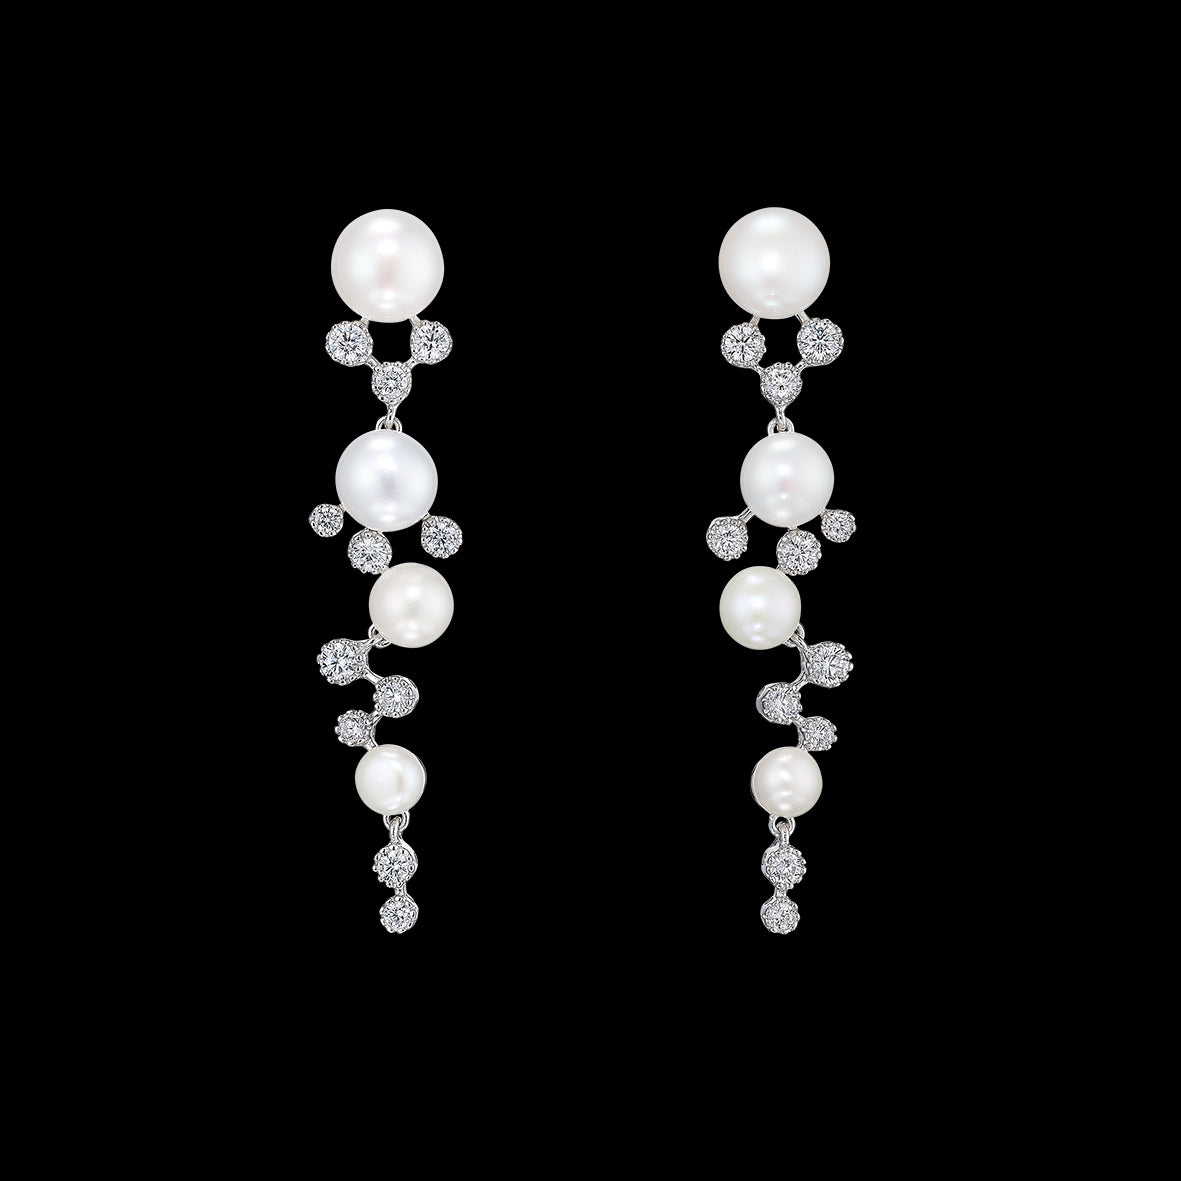 Constellation Pearl Earrings, Earrings, Anabela Chan Joaillerie - Fine jewelry with laboratory grown and created gemstones hand-crafted in the United Kingdom. Anabela Chan Joaillerie is the first fine jewellery brand in the world to champion laboratory-grown and created gemstones with high jewellery design, artisanal craftsmanship and a focus on ethical and sustainable innovations.